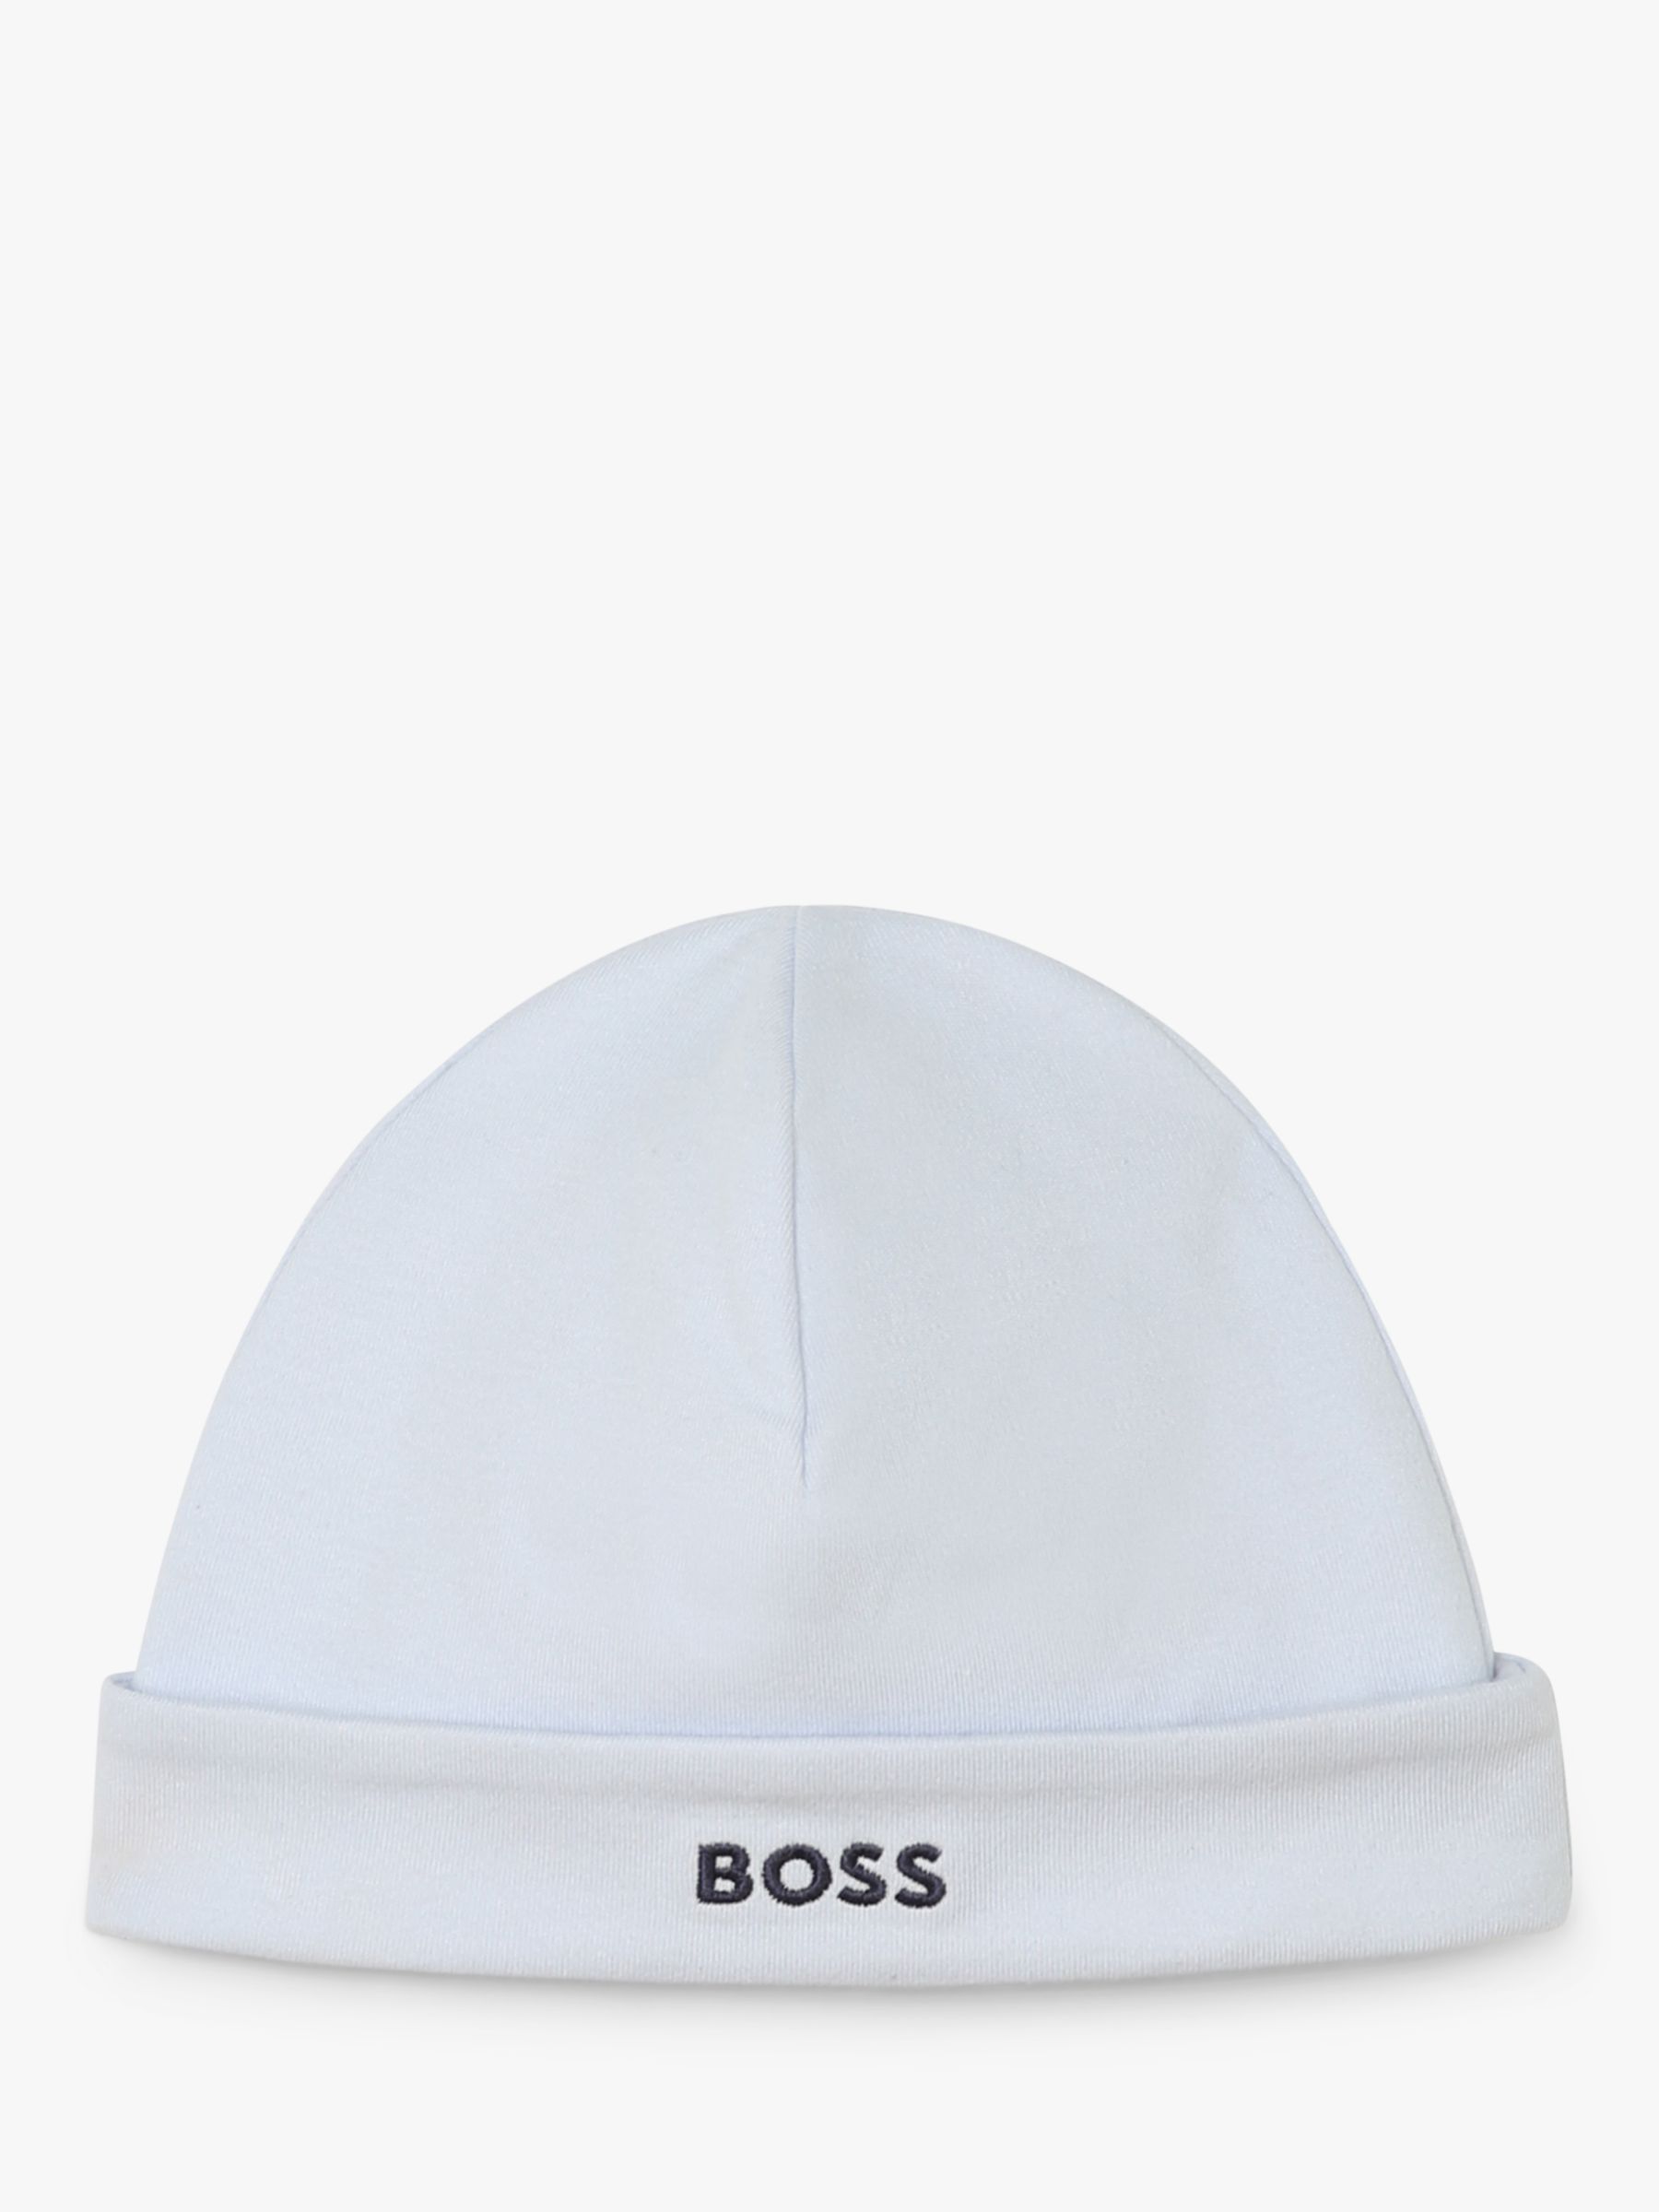 BOSS Baby Embroidered Logo Turn Up Hat, Blue, 1 months